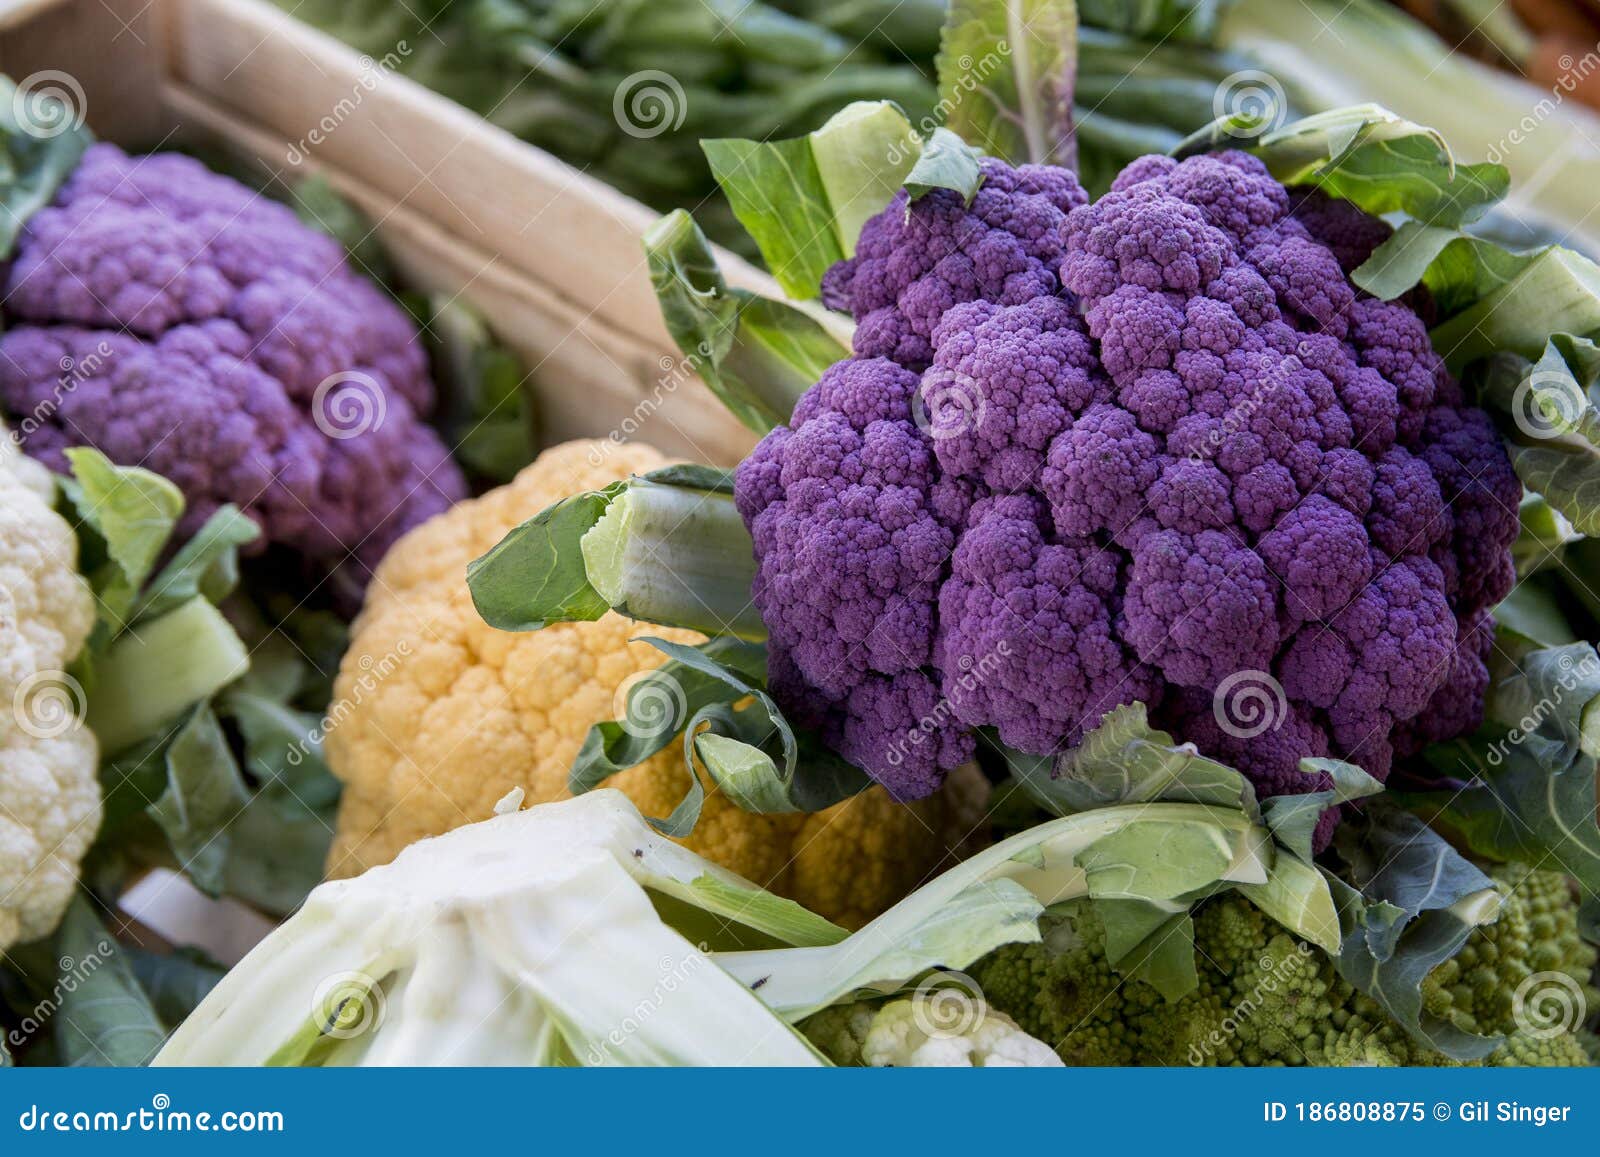 colorful purple and yellow cauliflowers in the market